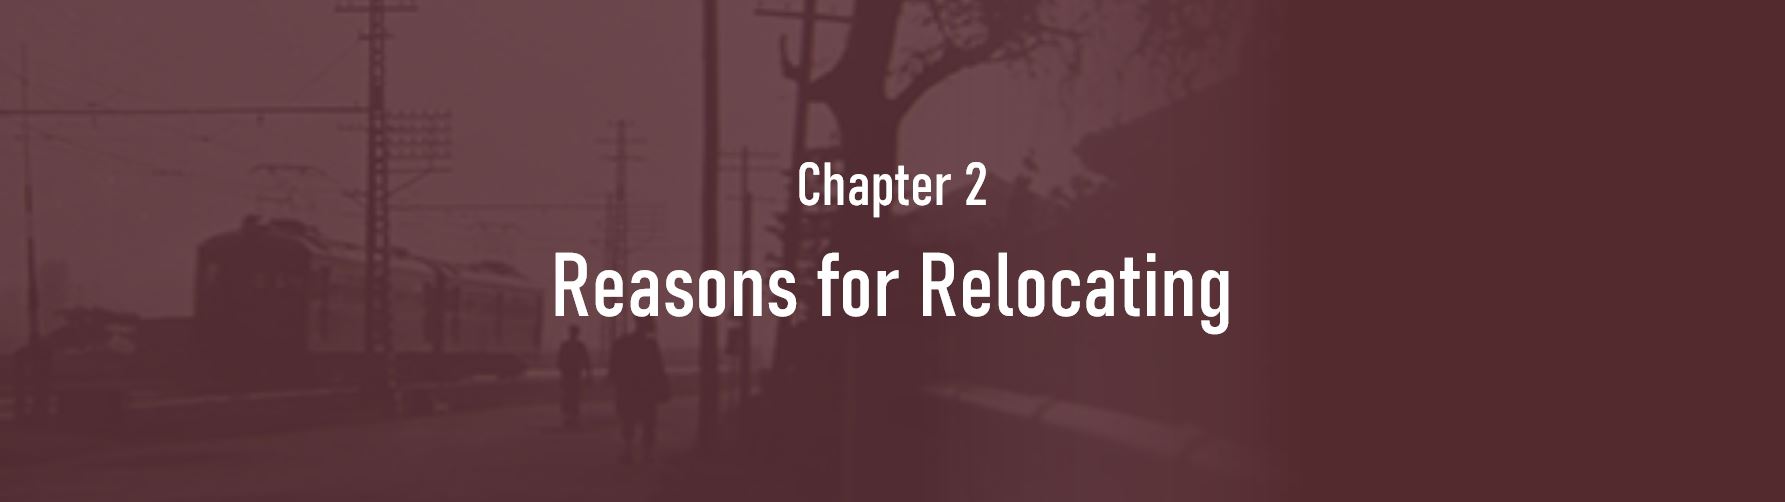 Chapter 2. Reasons for Relocating